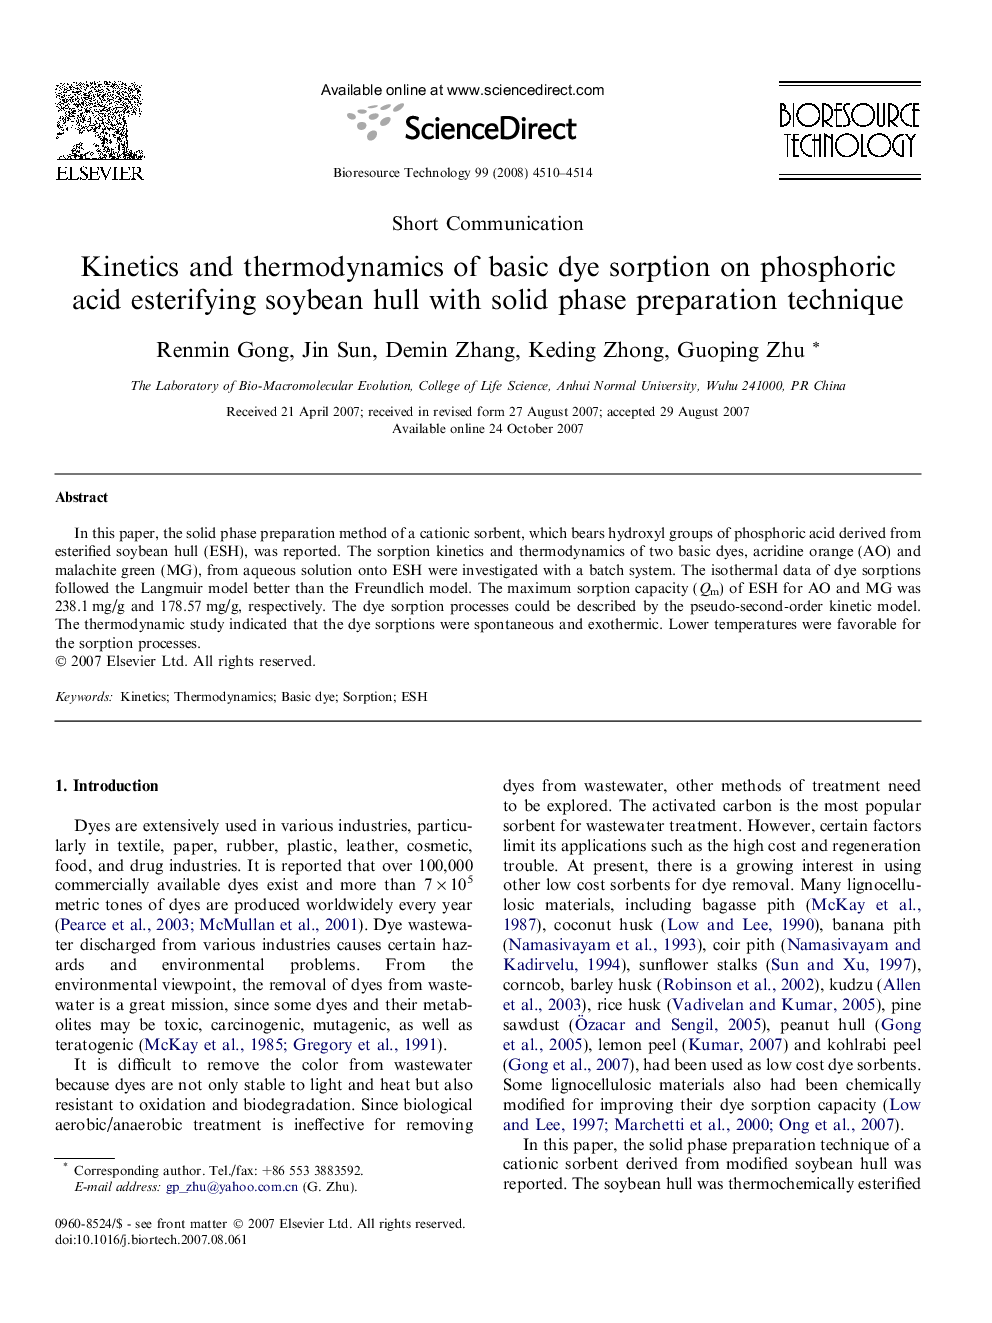 Kinetics and thermodynamics of basic dye sorption on phosphoric acid esterifying soybean hull with solid phase preparation technique